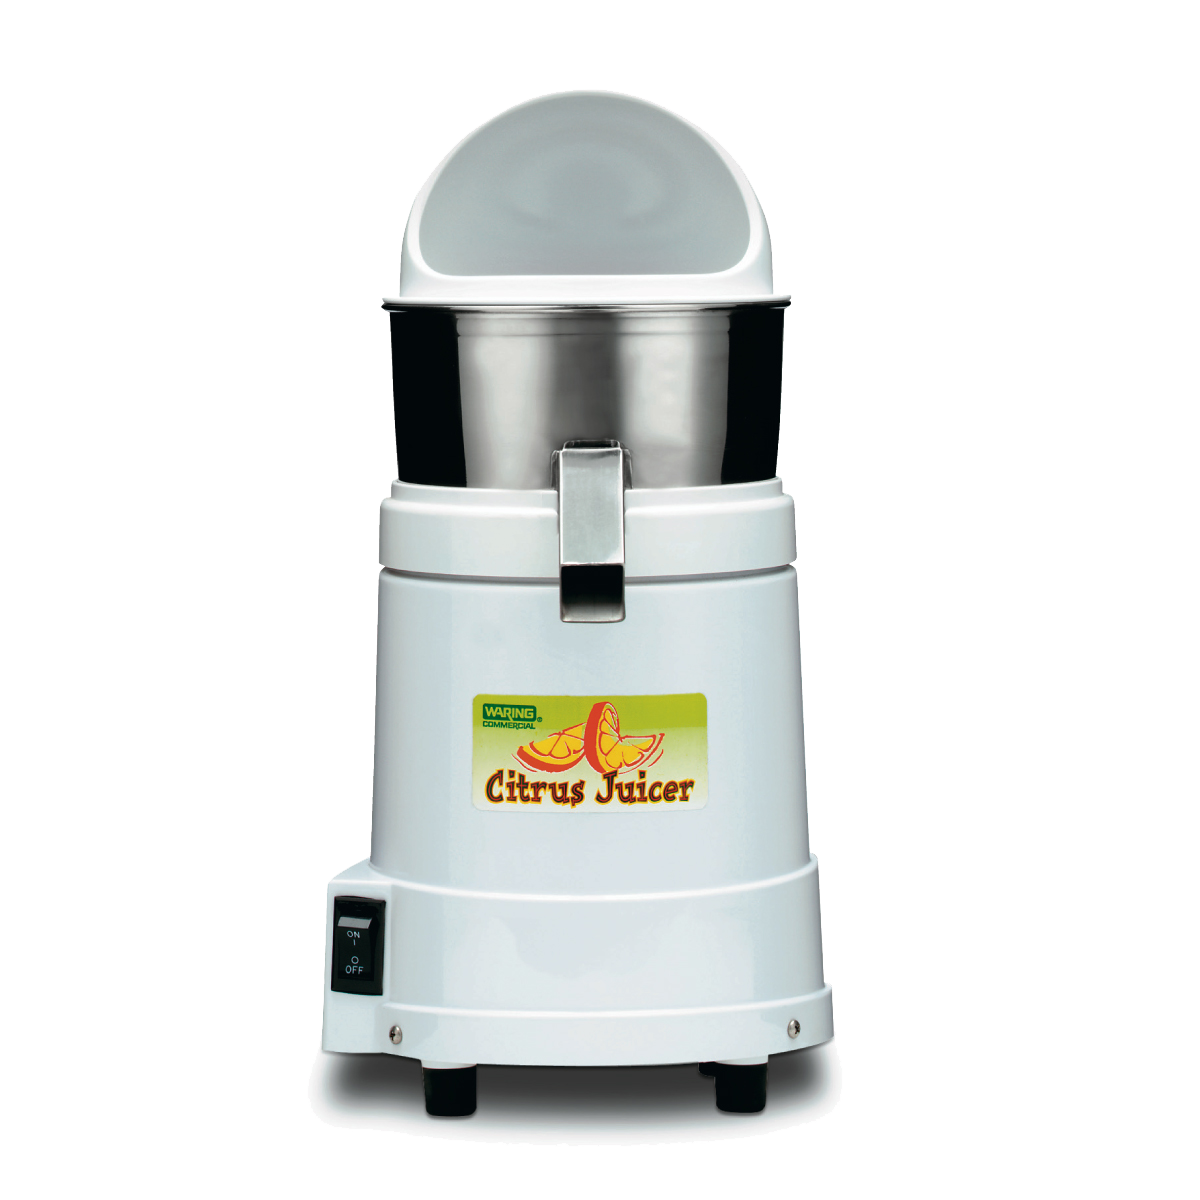 https://www.waringcommercialproducts.com/files/products/jc4000-waring-juicer-main.png